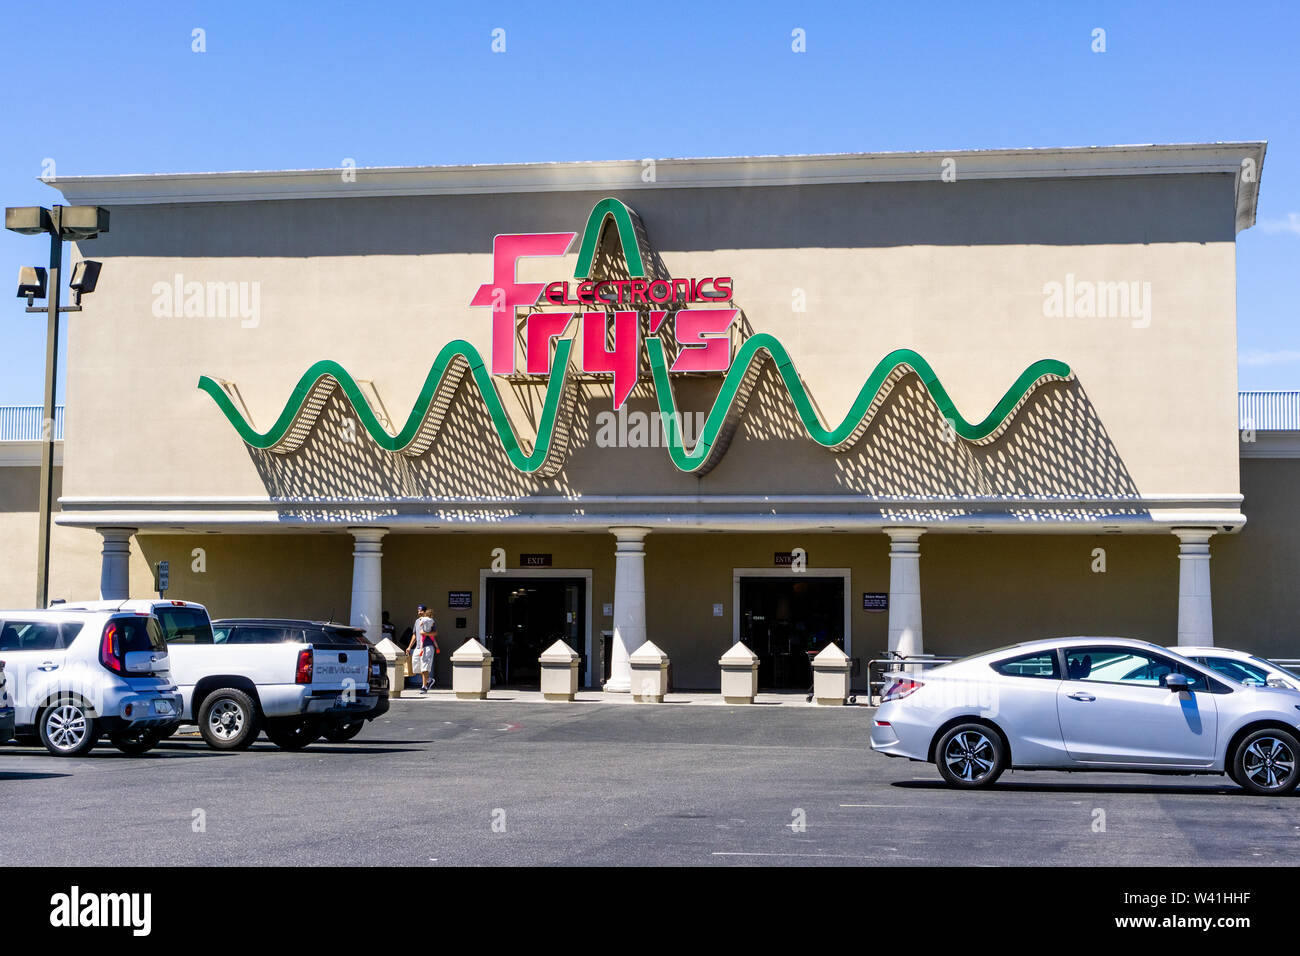 July 12, 2019 Sunnyvale / CA / USA - Fry's Electronics store front; Fry's Electronics is an American retailer of software, consumer electronics, house Stock Photo